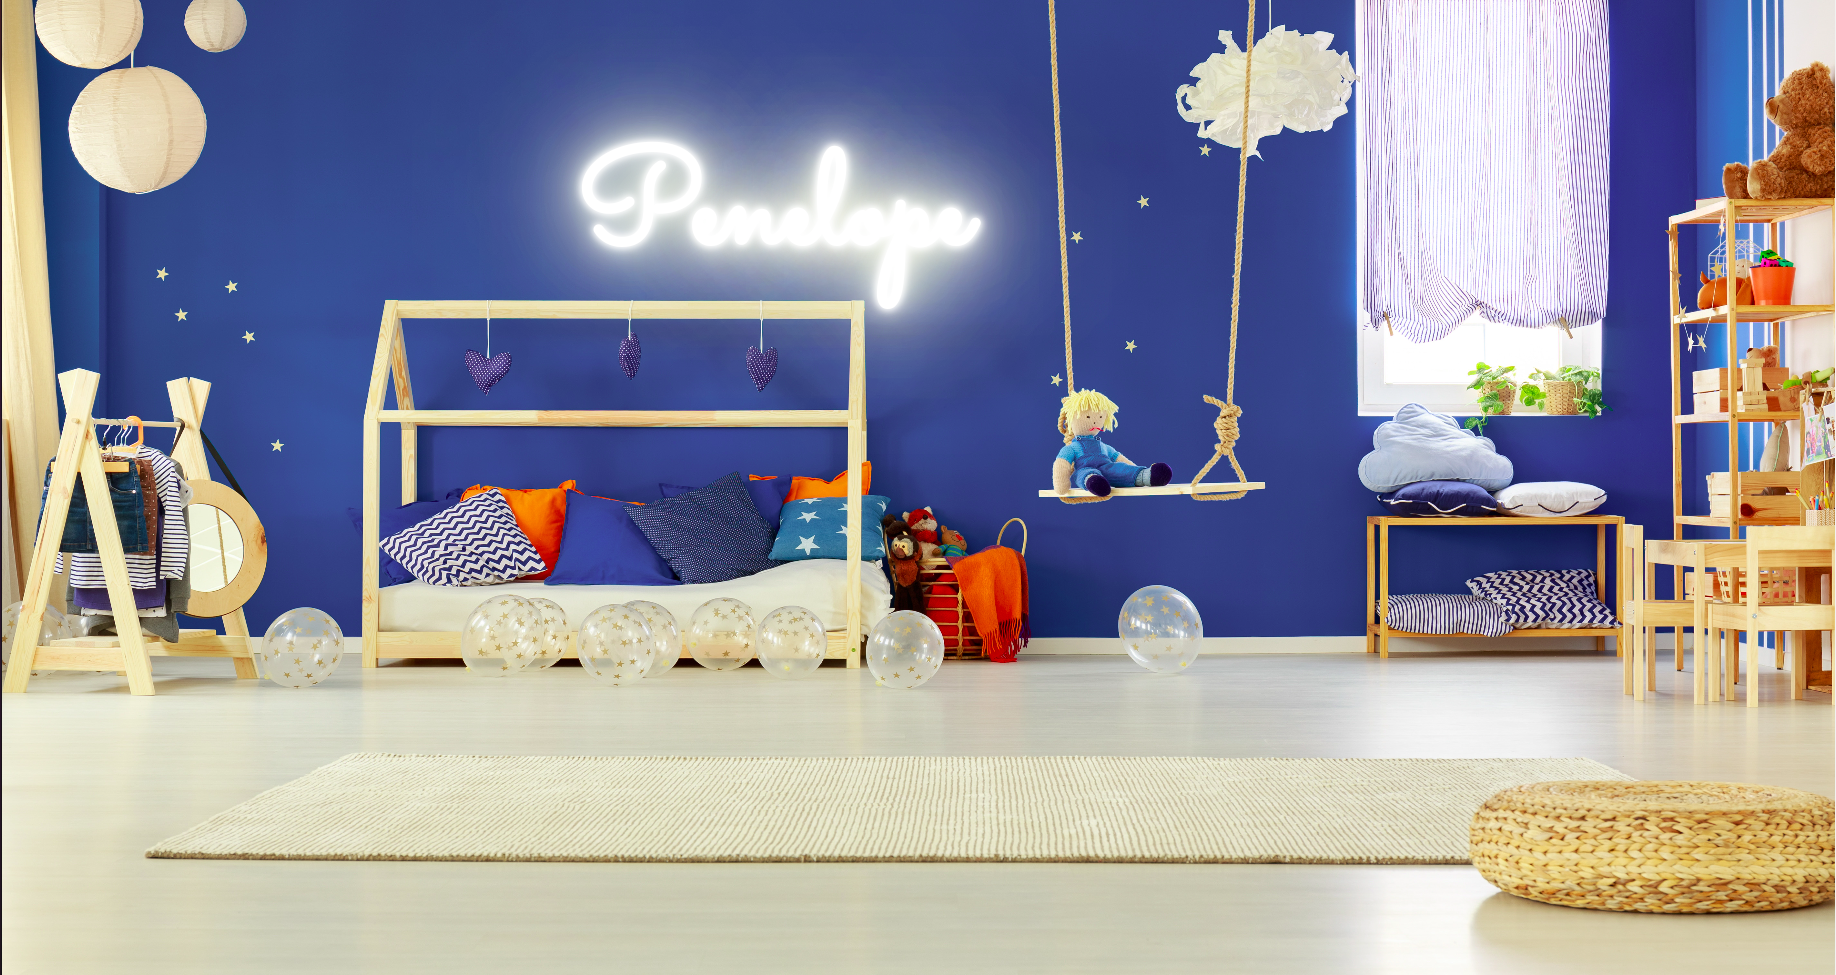 "Penelope" Baby Name LED Neon Sign